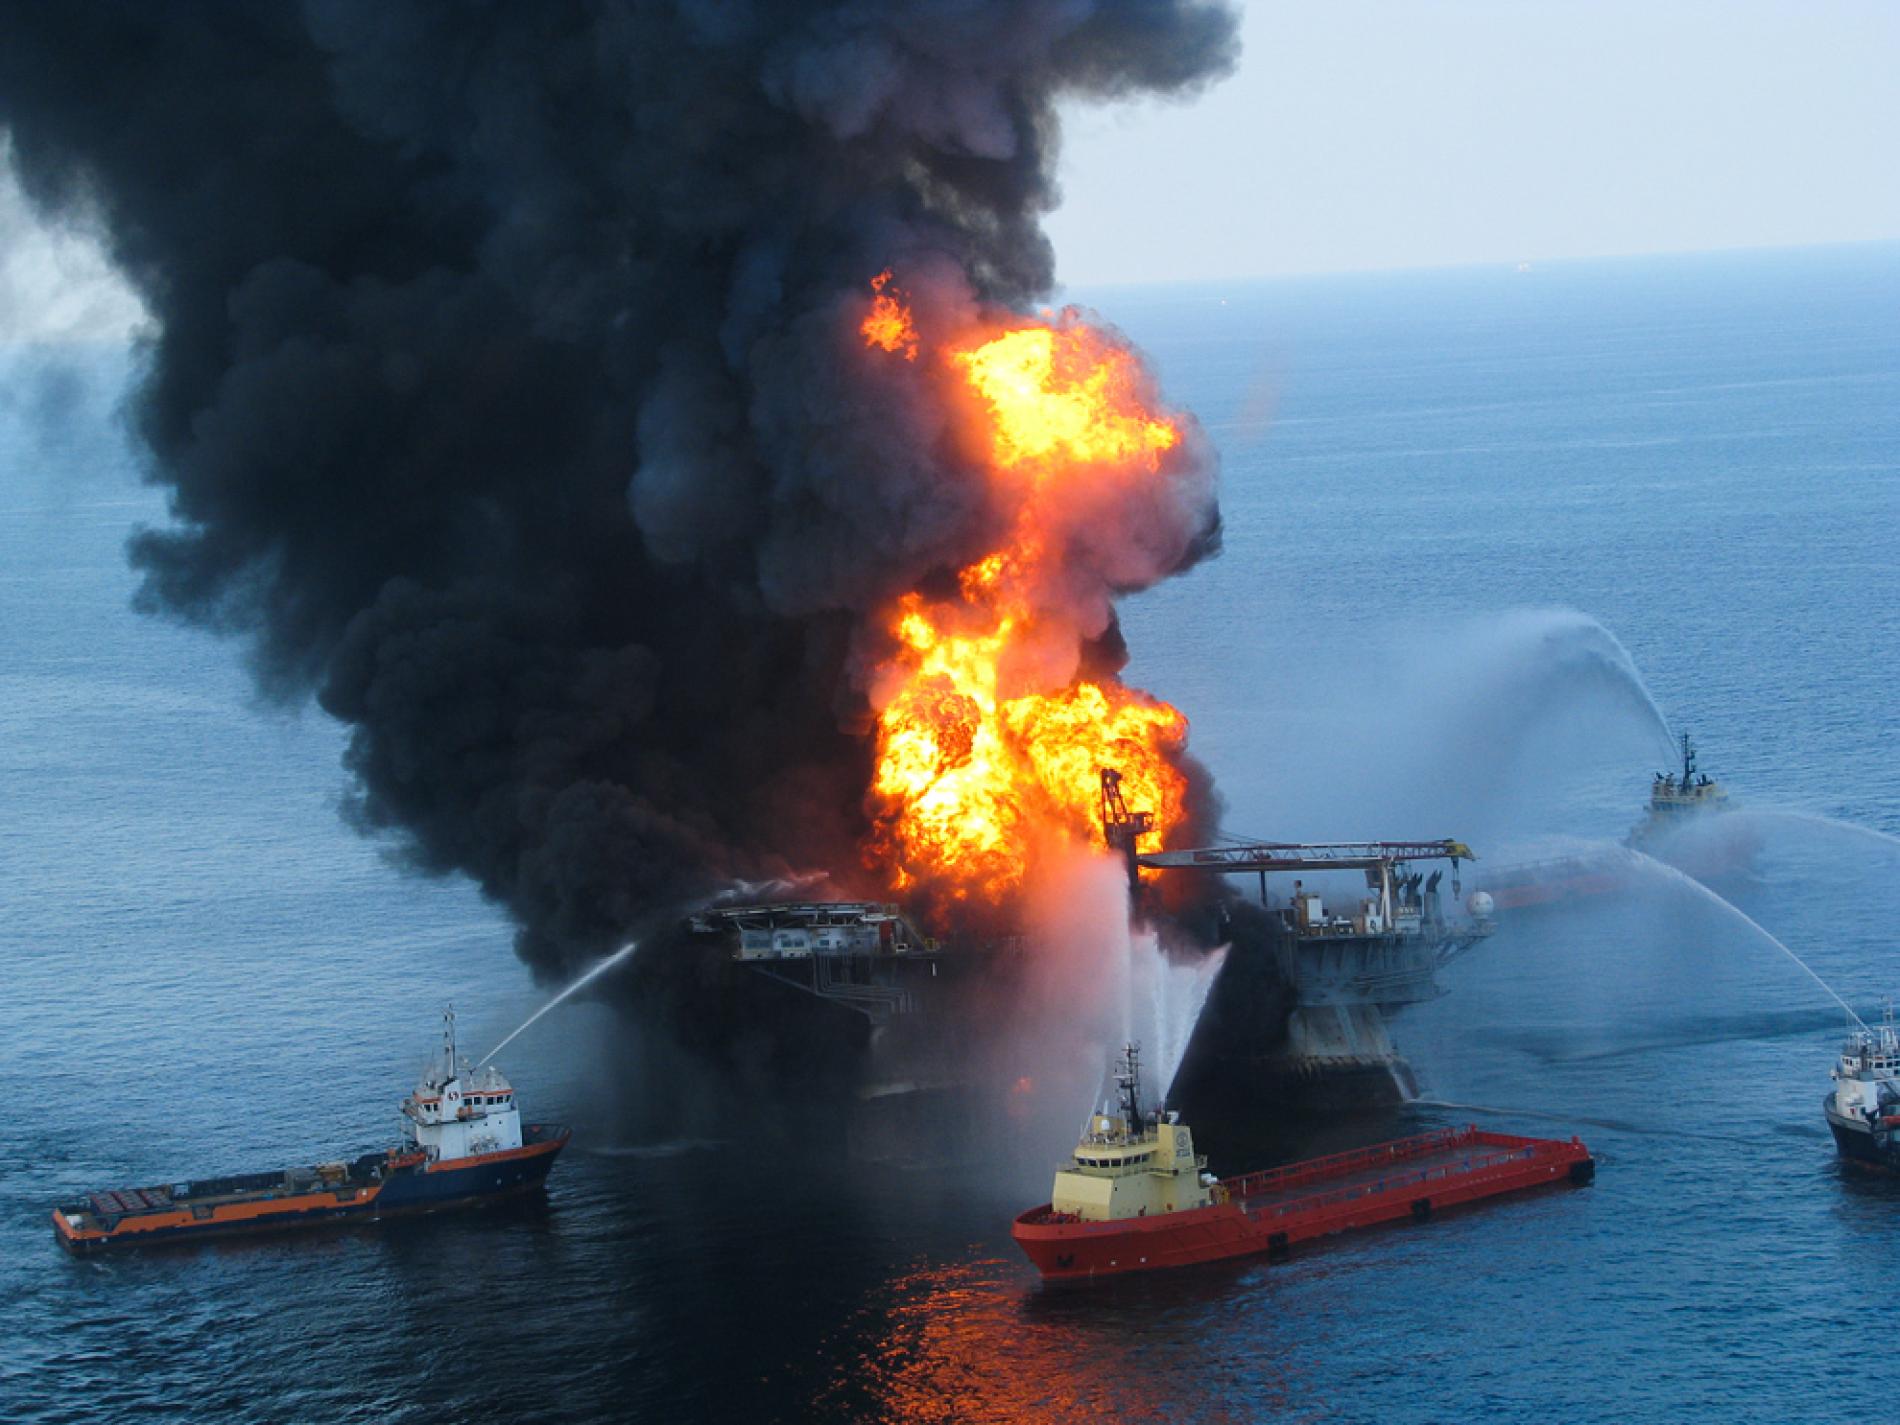 Rig Explosion Shows Risks in Key Oil Frontier